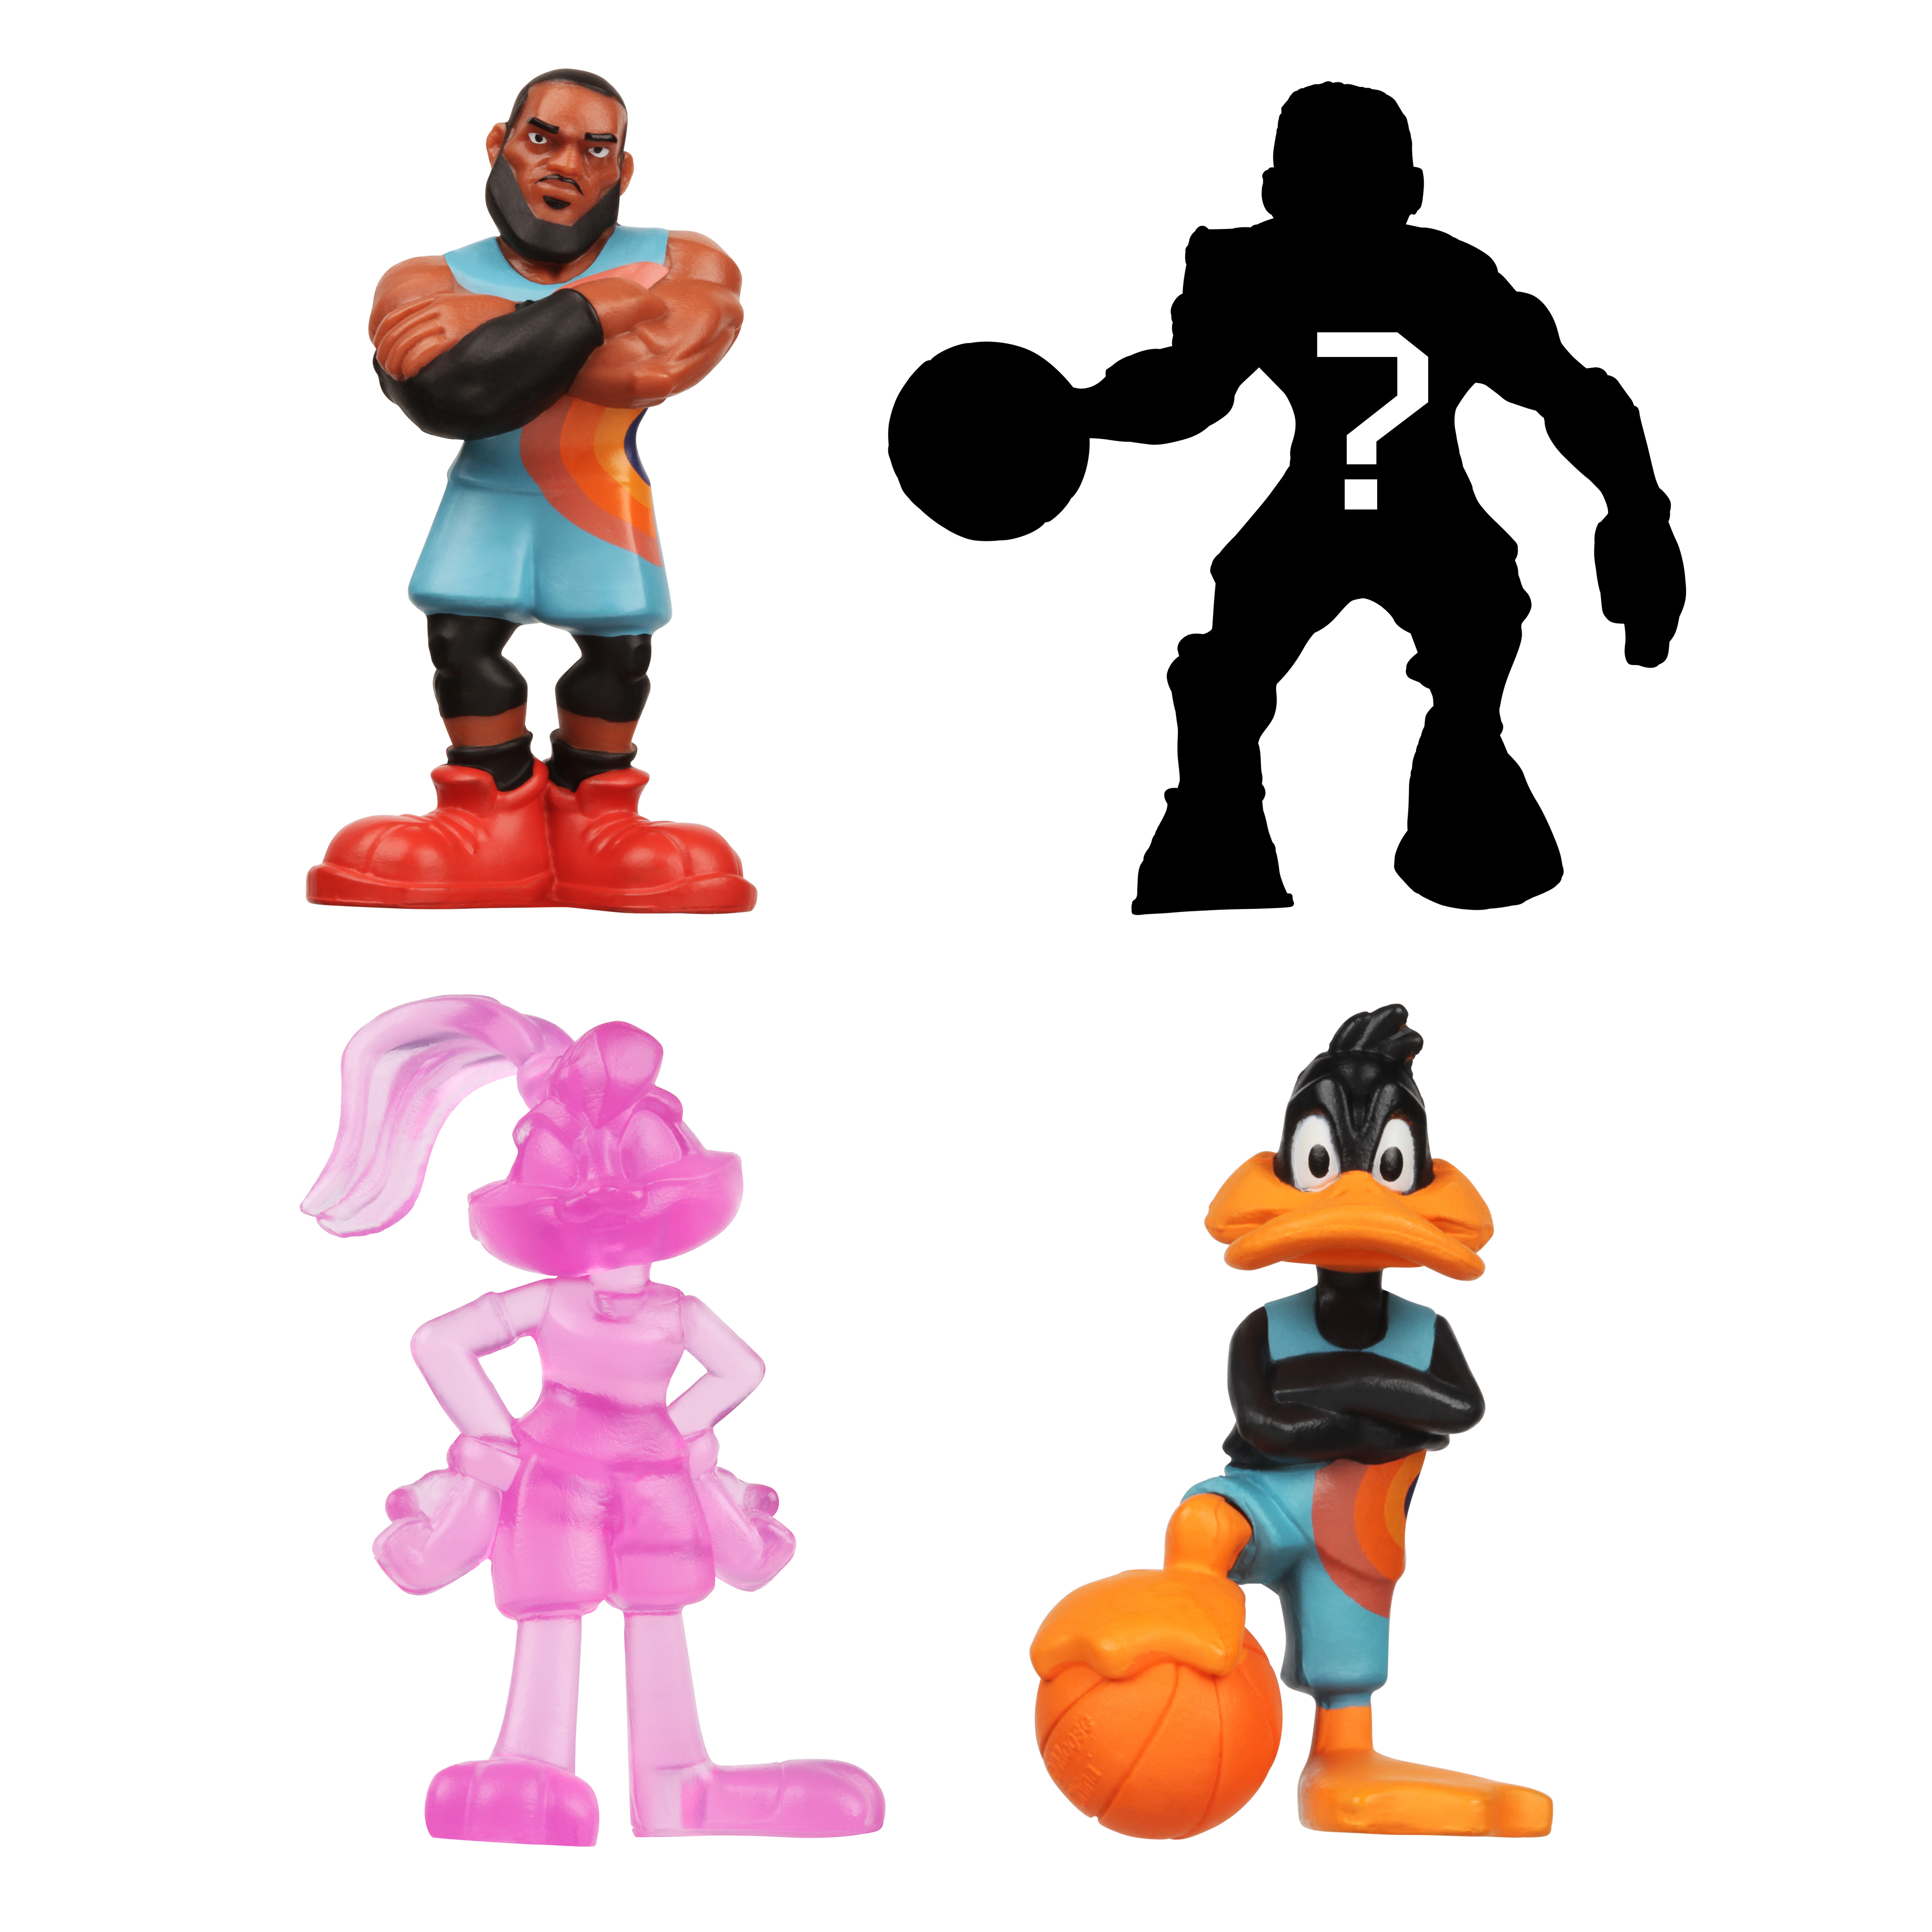 Space Jam: A New Legacy - 4 Pack - 2" LeBron James, Daffy Duck, Lola Bunny, & 1 Mystery Figures - Starting Line Up - image 1 of 11